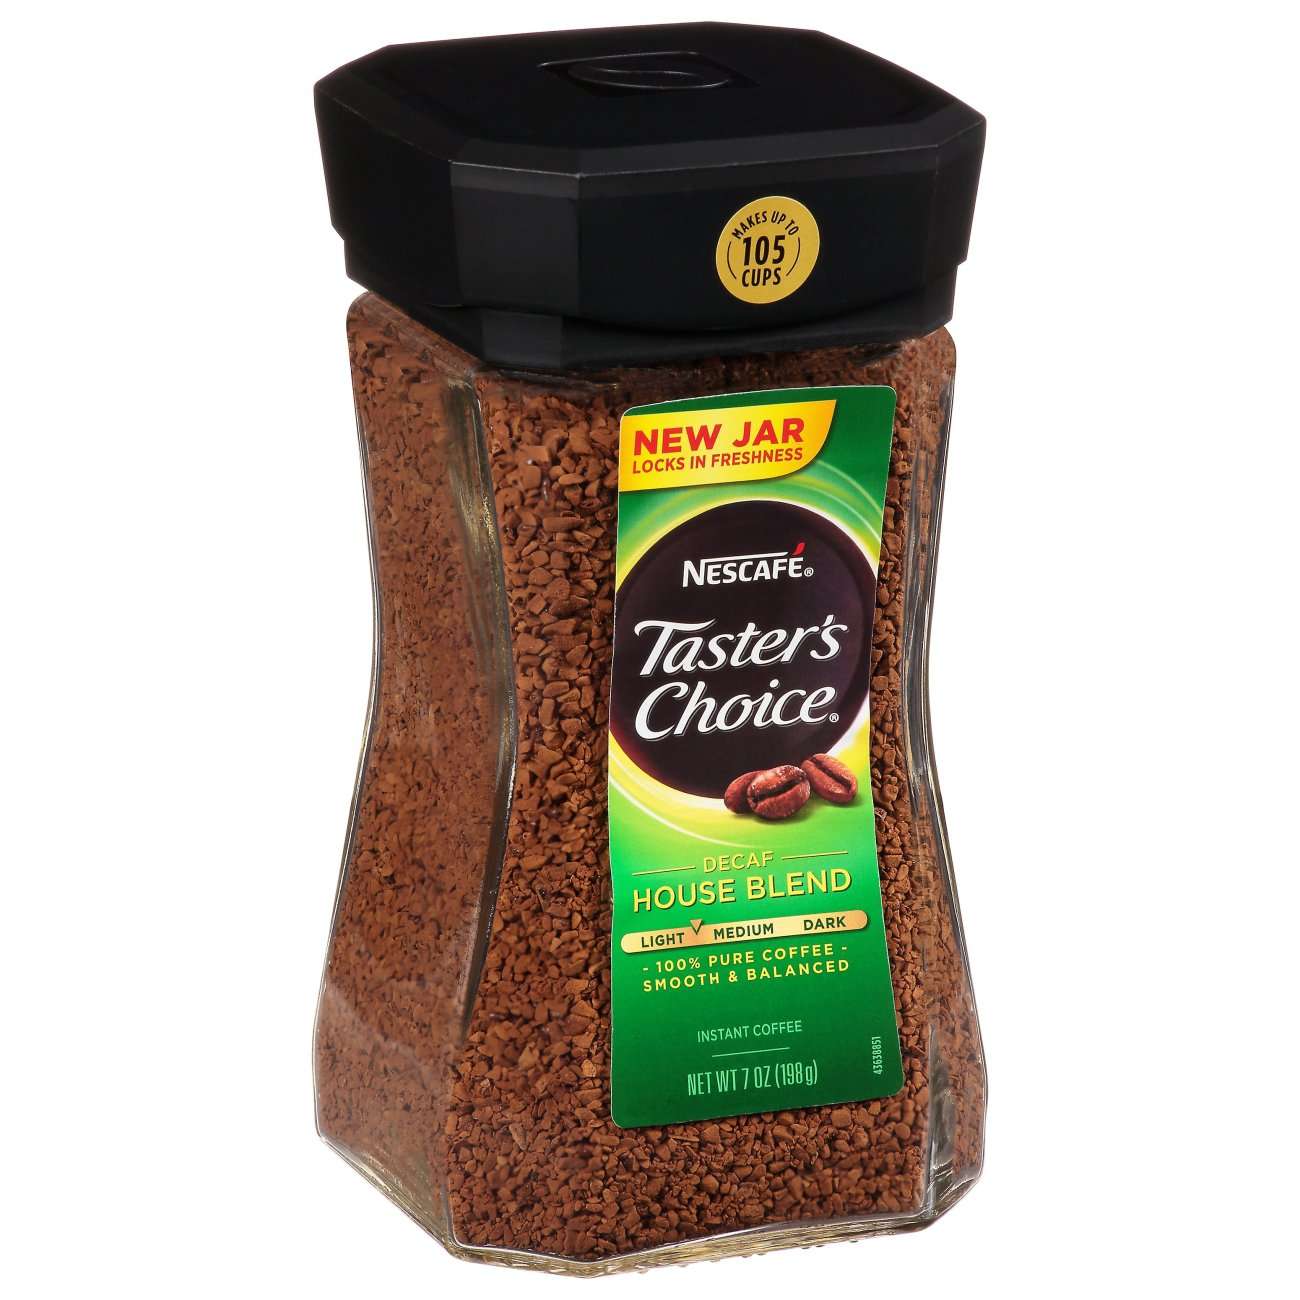 Nescafe Tasters Choice Decaf Instant Coffee